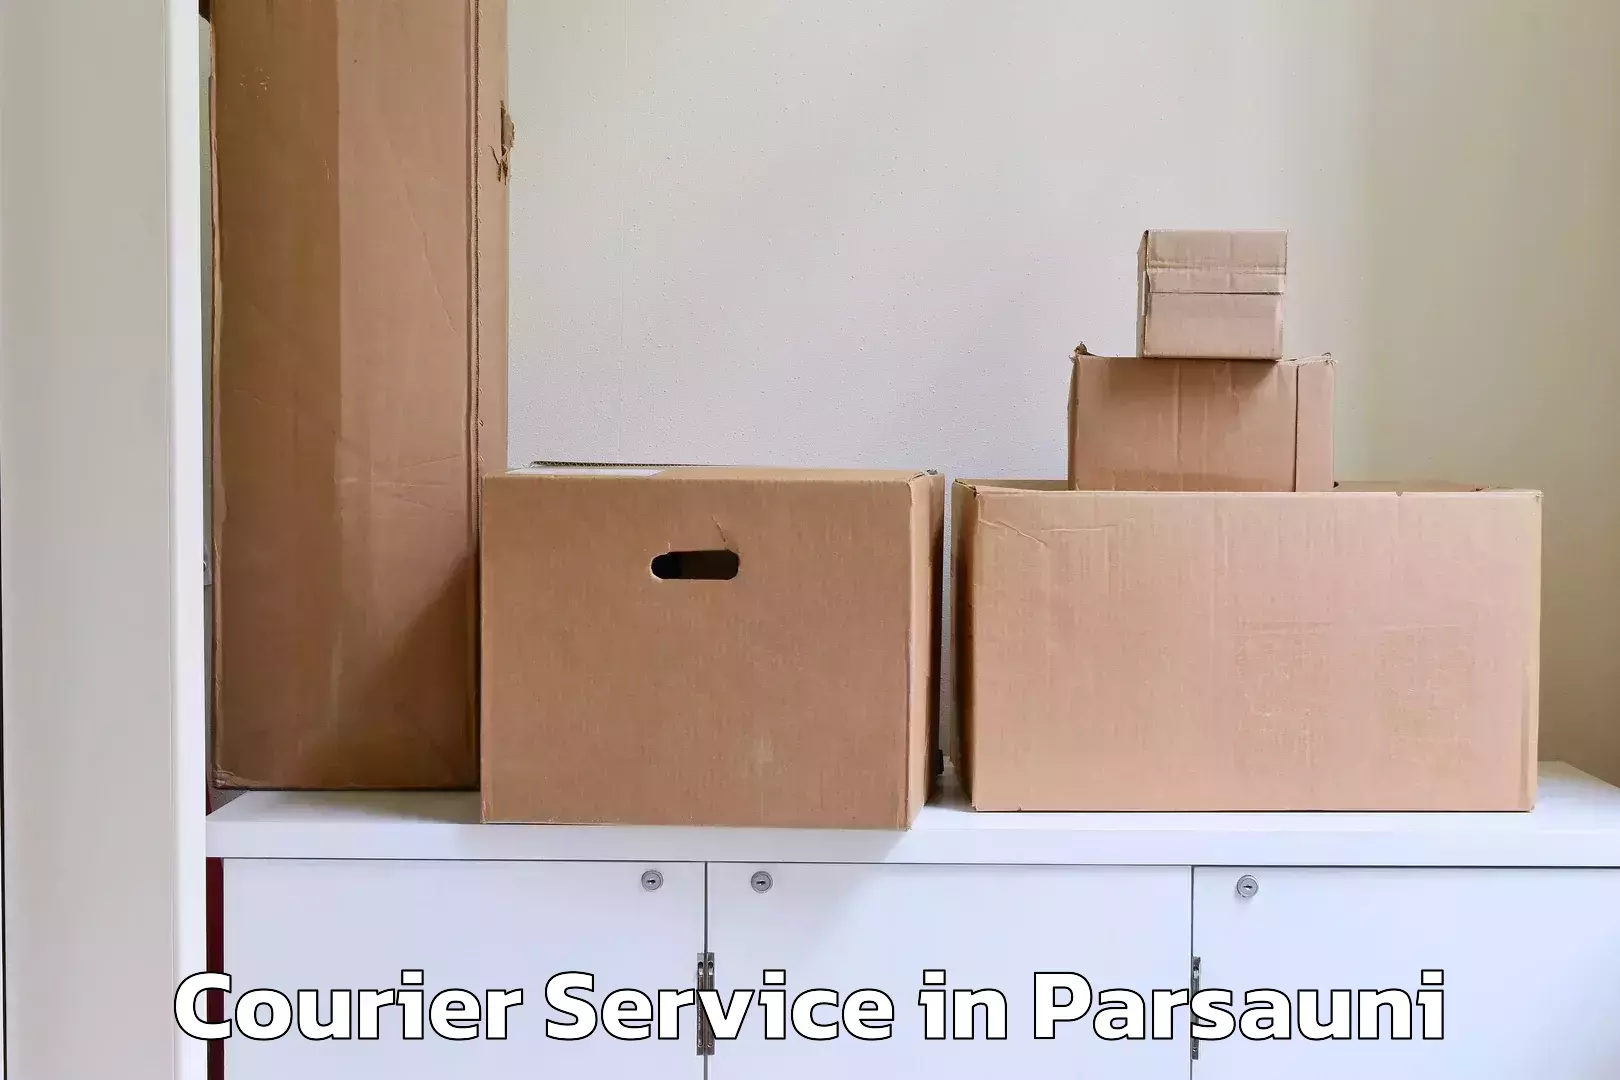 On-time delivery services in Parsauni